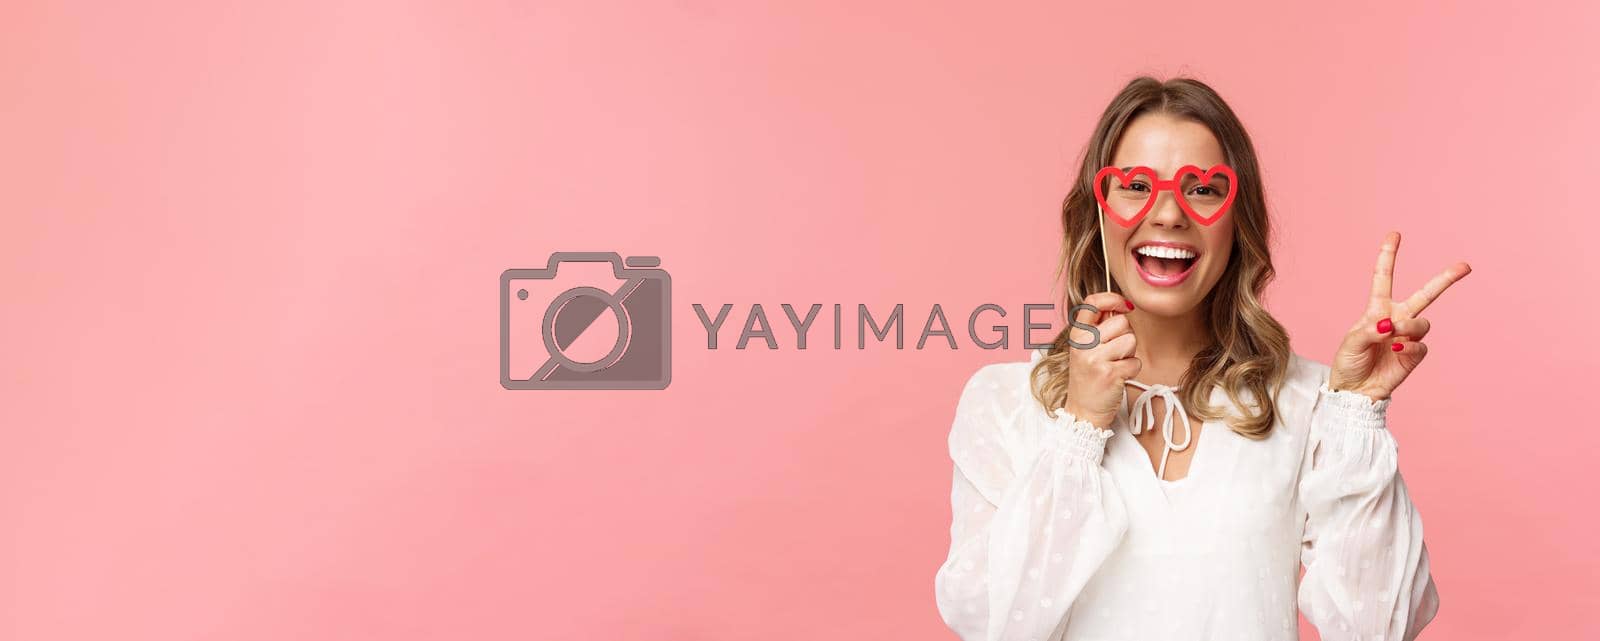 Spring, happiness and celebration concept. Close-up portrait of upbeat blond girl at party, wear white dress holding heart-shaped glasses mask over eyes and make peace sign cheerful.